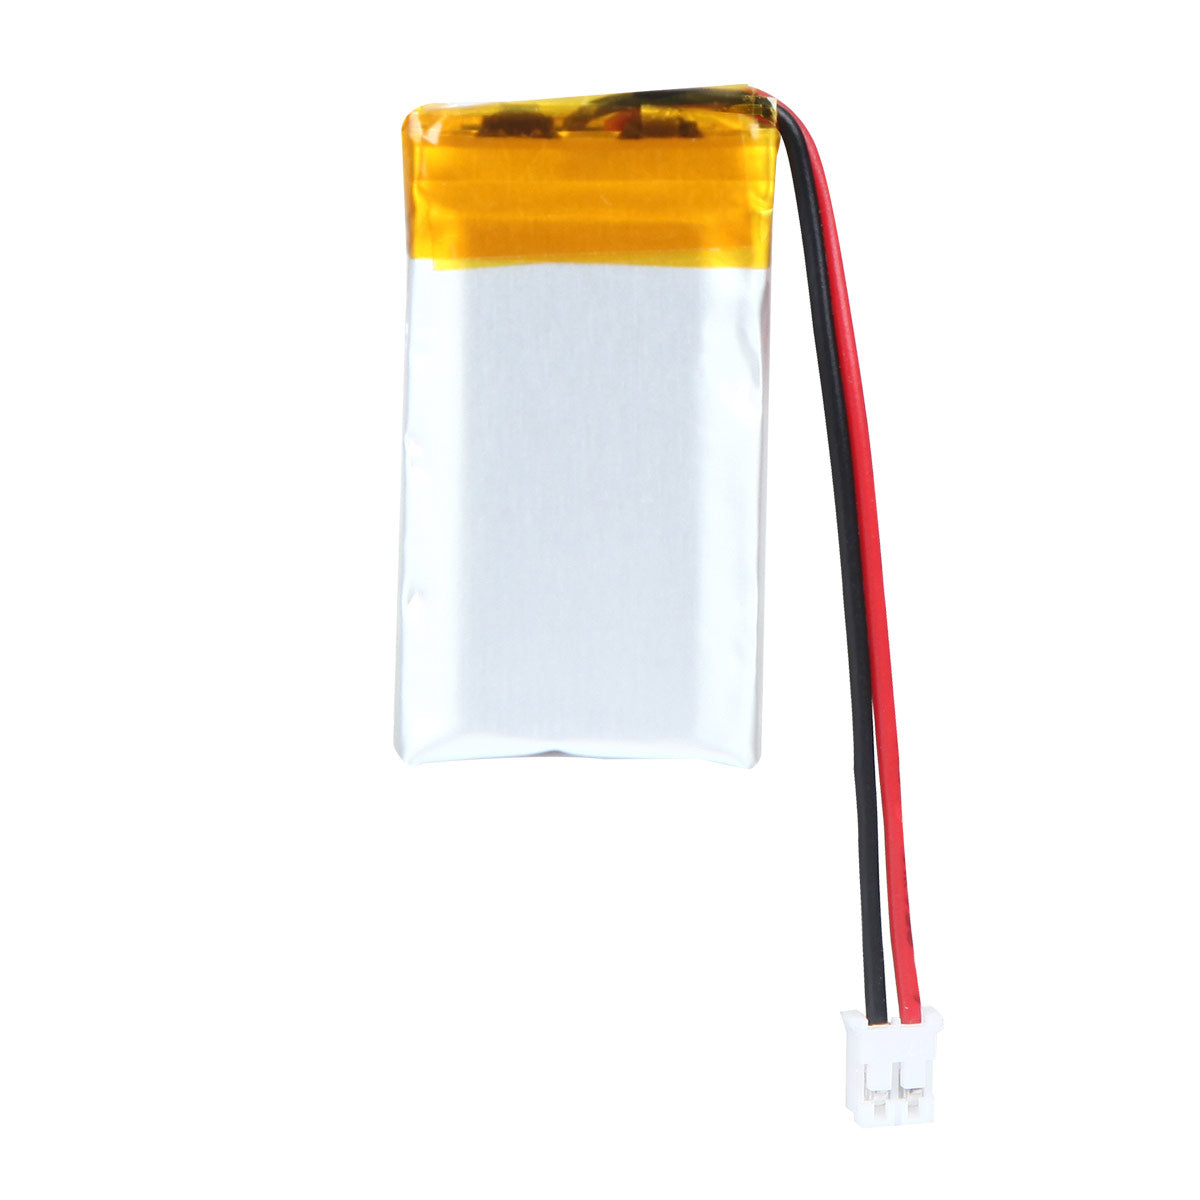 YDL 3.7V 350mAh 602035 Rechargeable Polymer Lithium-Ion Battery